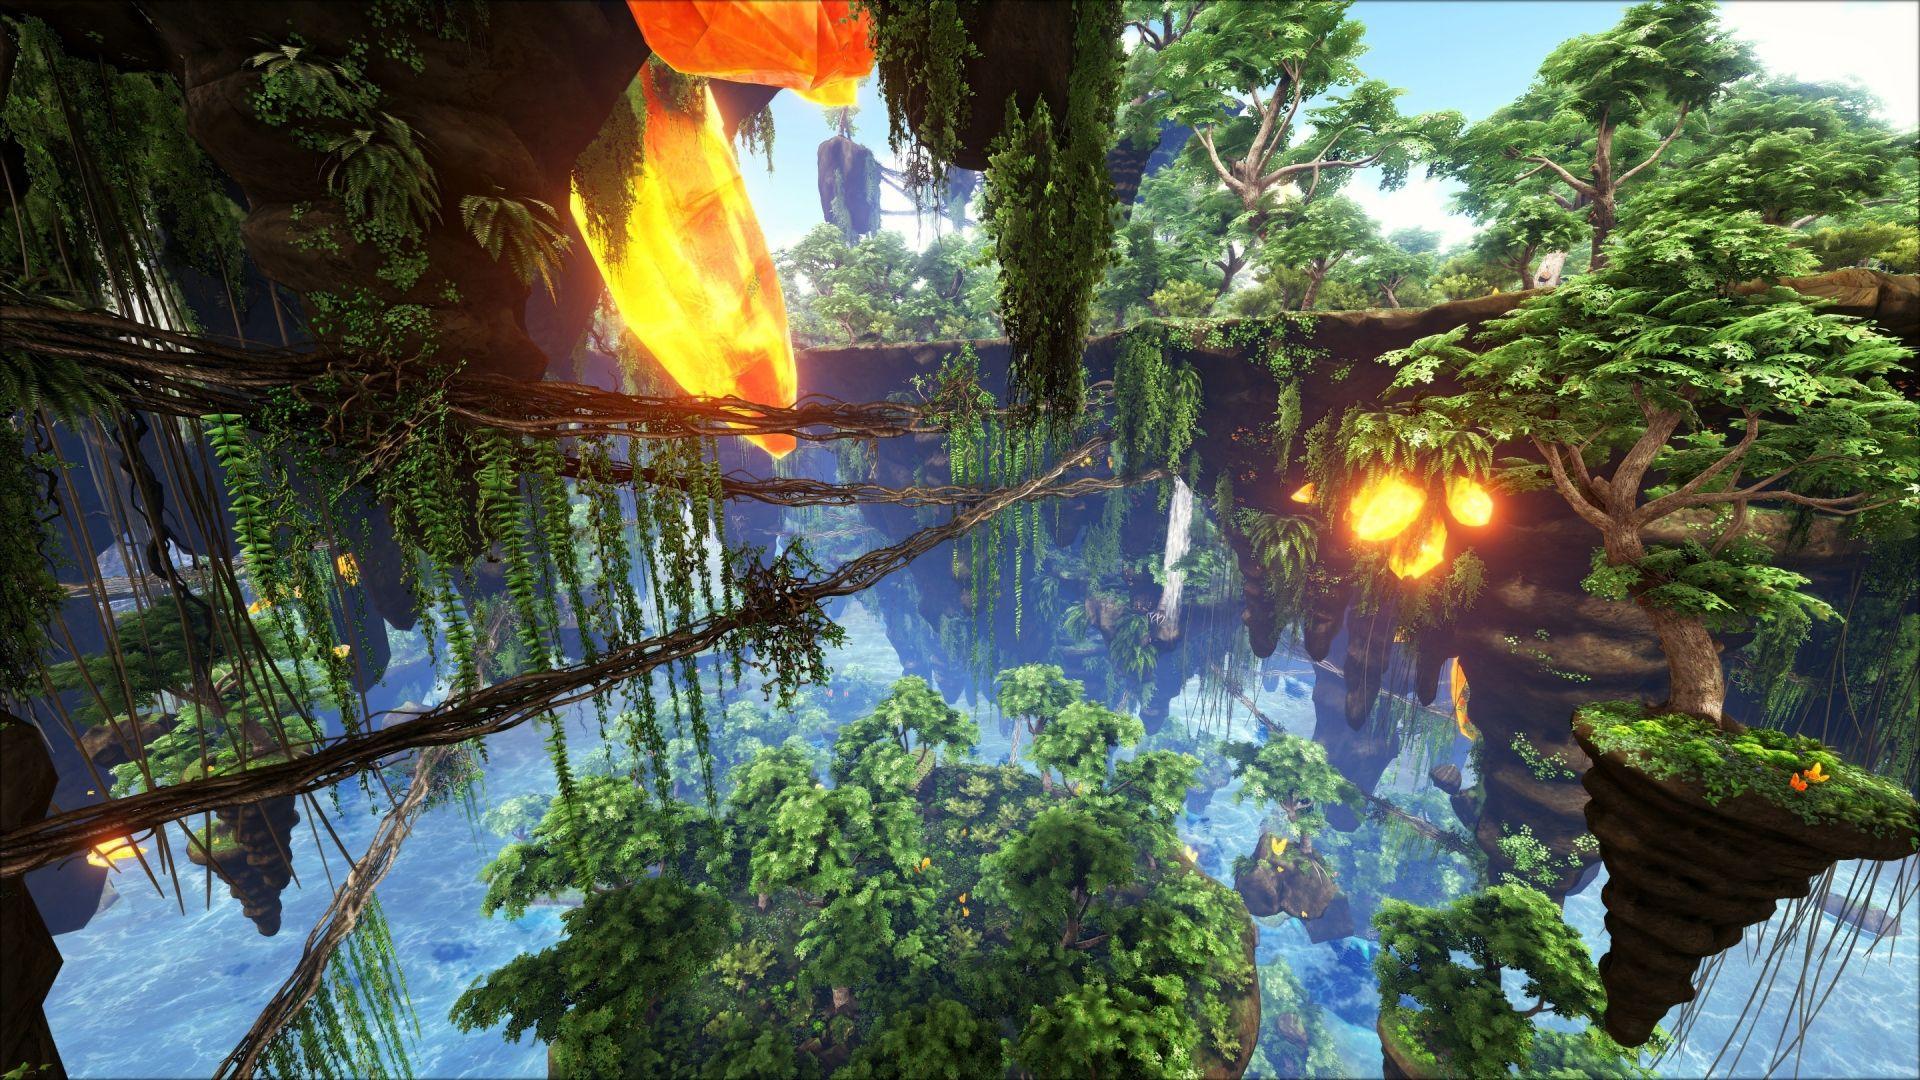 ark scorched earth download free